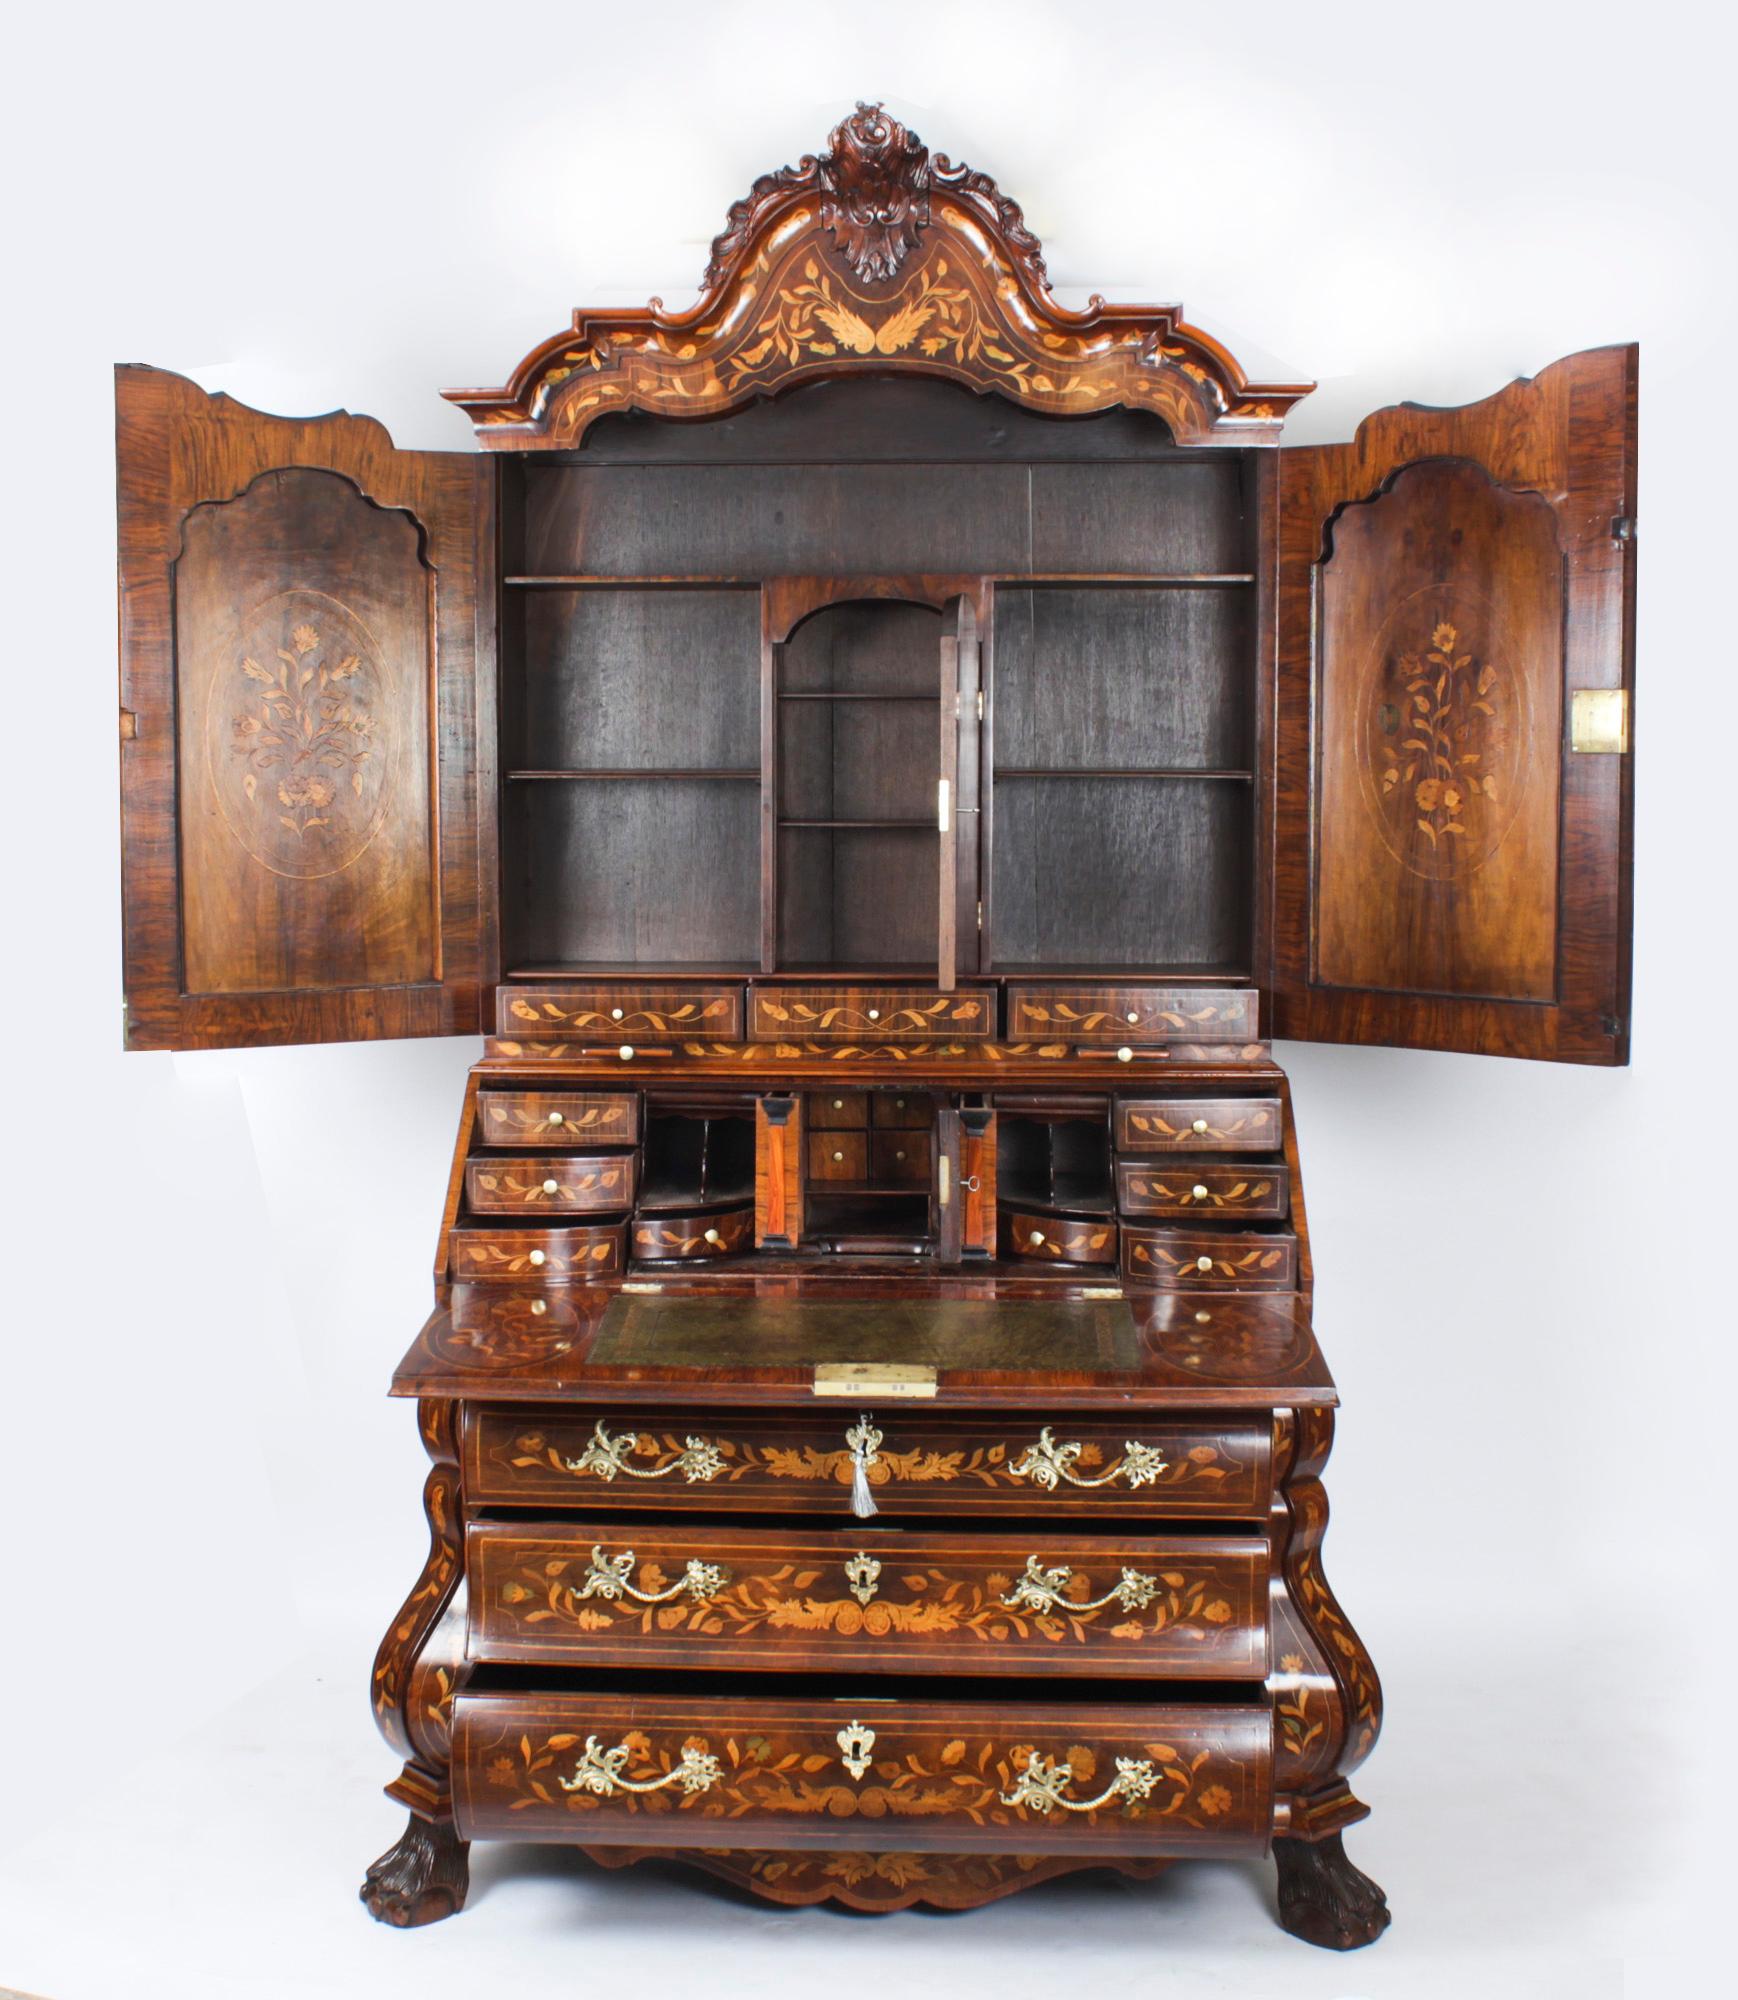 This is an important antique Dutch walnut and marquetry bureau bookcase, circa 1780 in date.
 
It has been made from the finest burr walnut with fabulous marquetry decoration depicting vases of flowers, exotic birds, ribbons, floral bouquets and